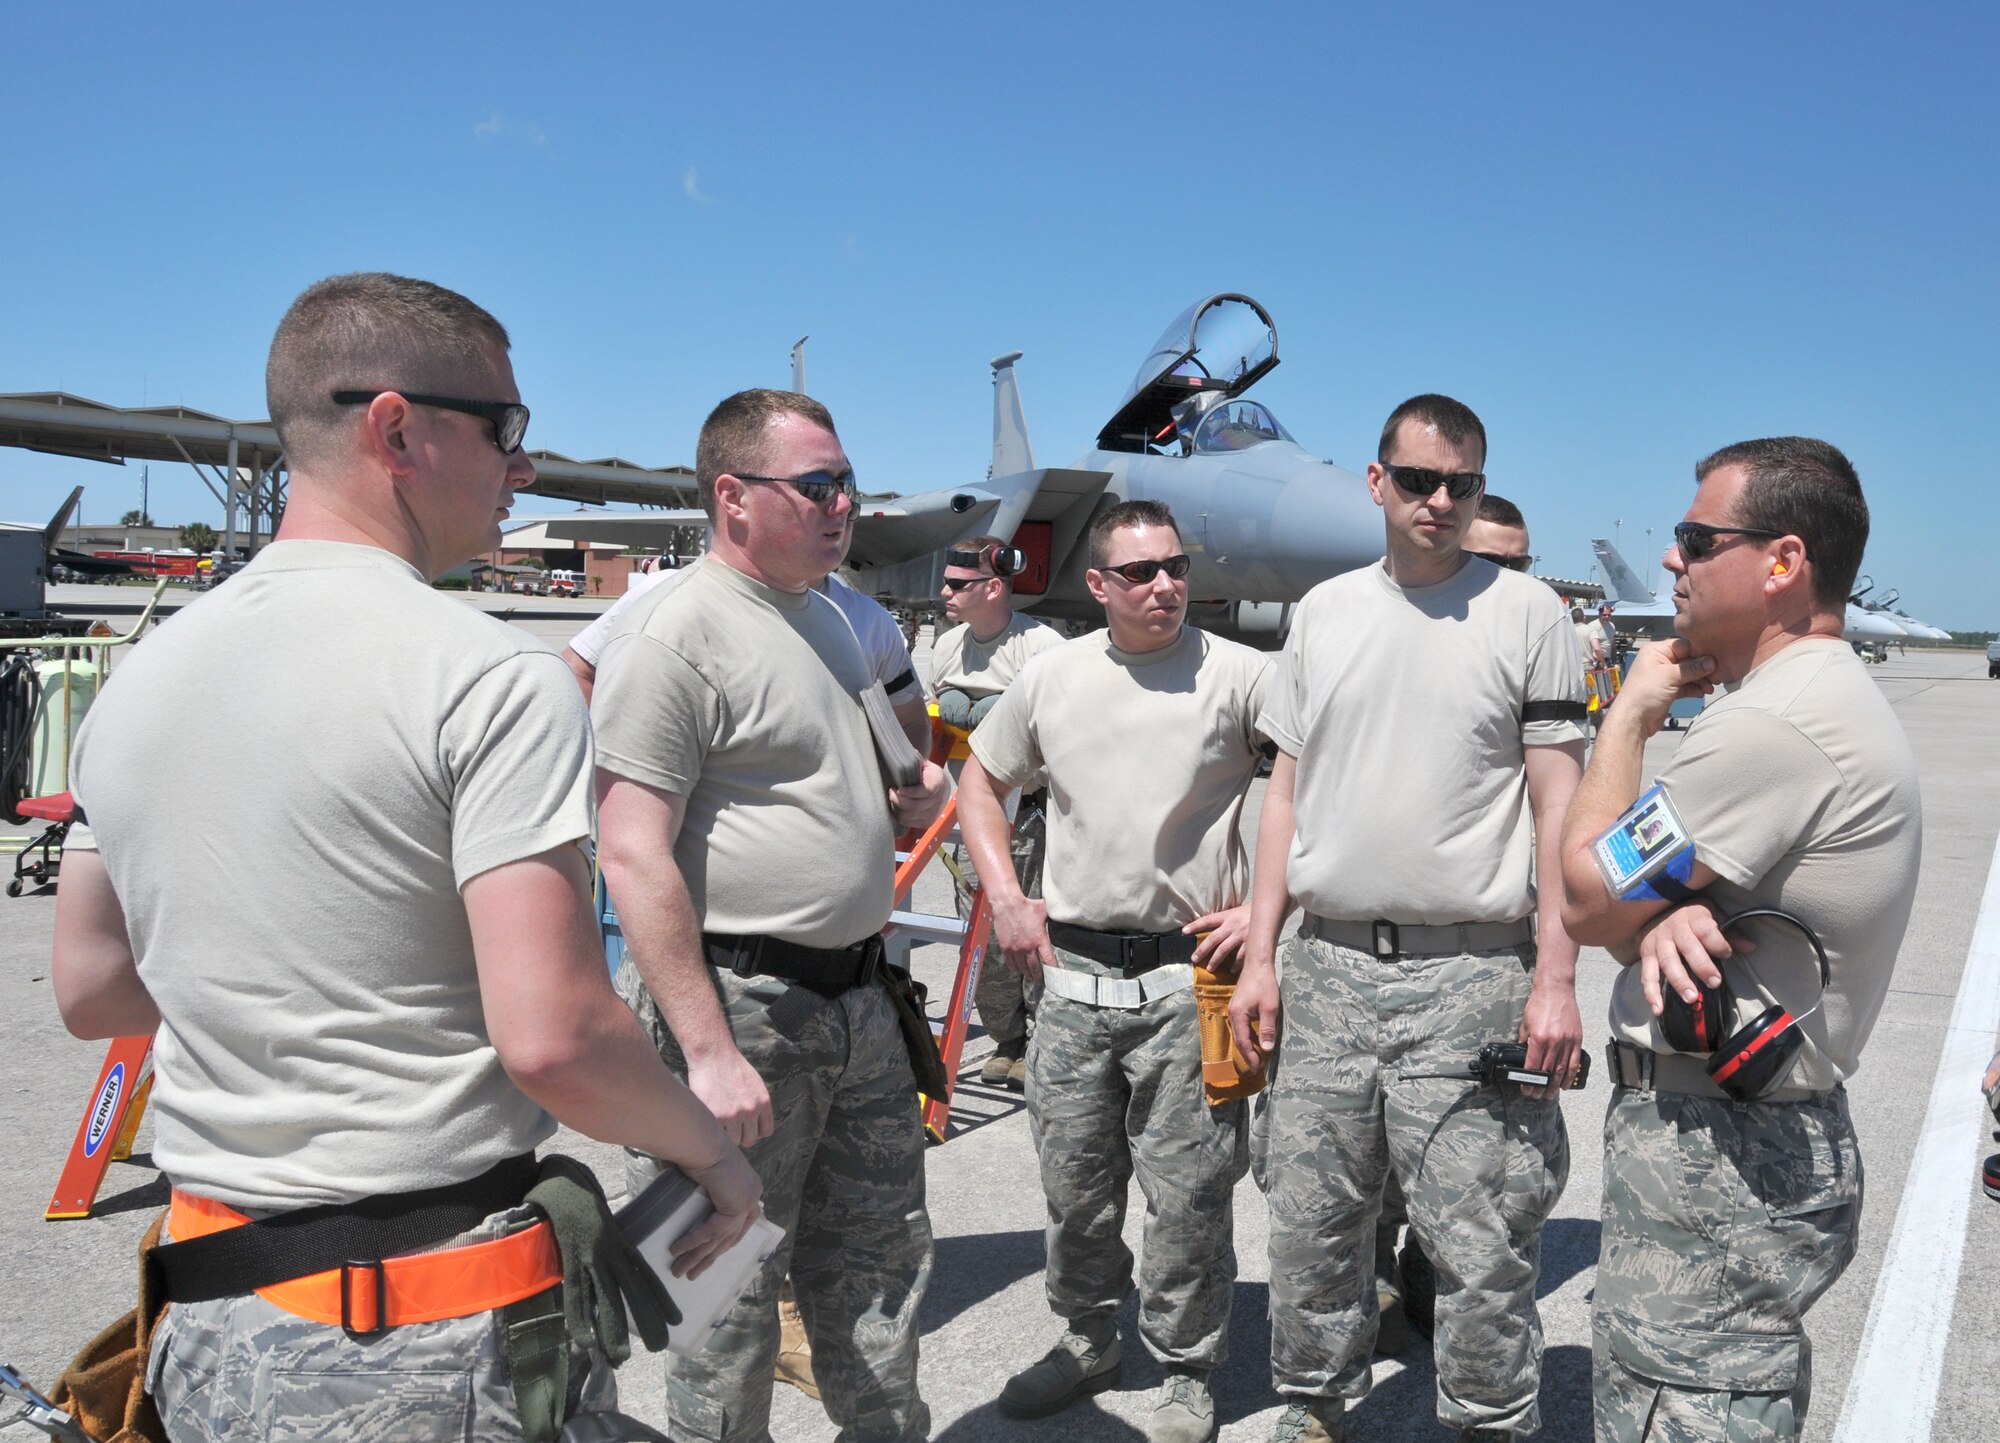 Chief Master Sergeant Robert Beaulieu, a weapons manager with the 104th Fighter Wing, Massachusetts Air National Guard, briefs his personnel before loading live missiles onto F-15 Eagles prior to live fire missions while deployed to Tyndall AFB Florida, in support of the Weapons System Evaluation Program (WSEP) on April 12, 2011. The two week training and evaluation program is important for ground crews to test their maintenance systems and processes while loading live munitions on F-15 Eagles, as well as critical live training for the F-15 pilots to employ air-to-air missiles against real world targets.